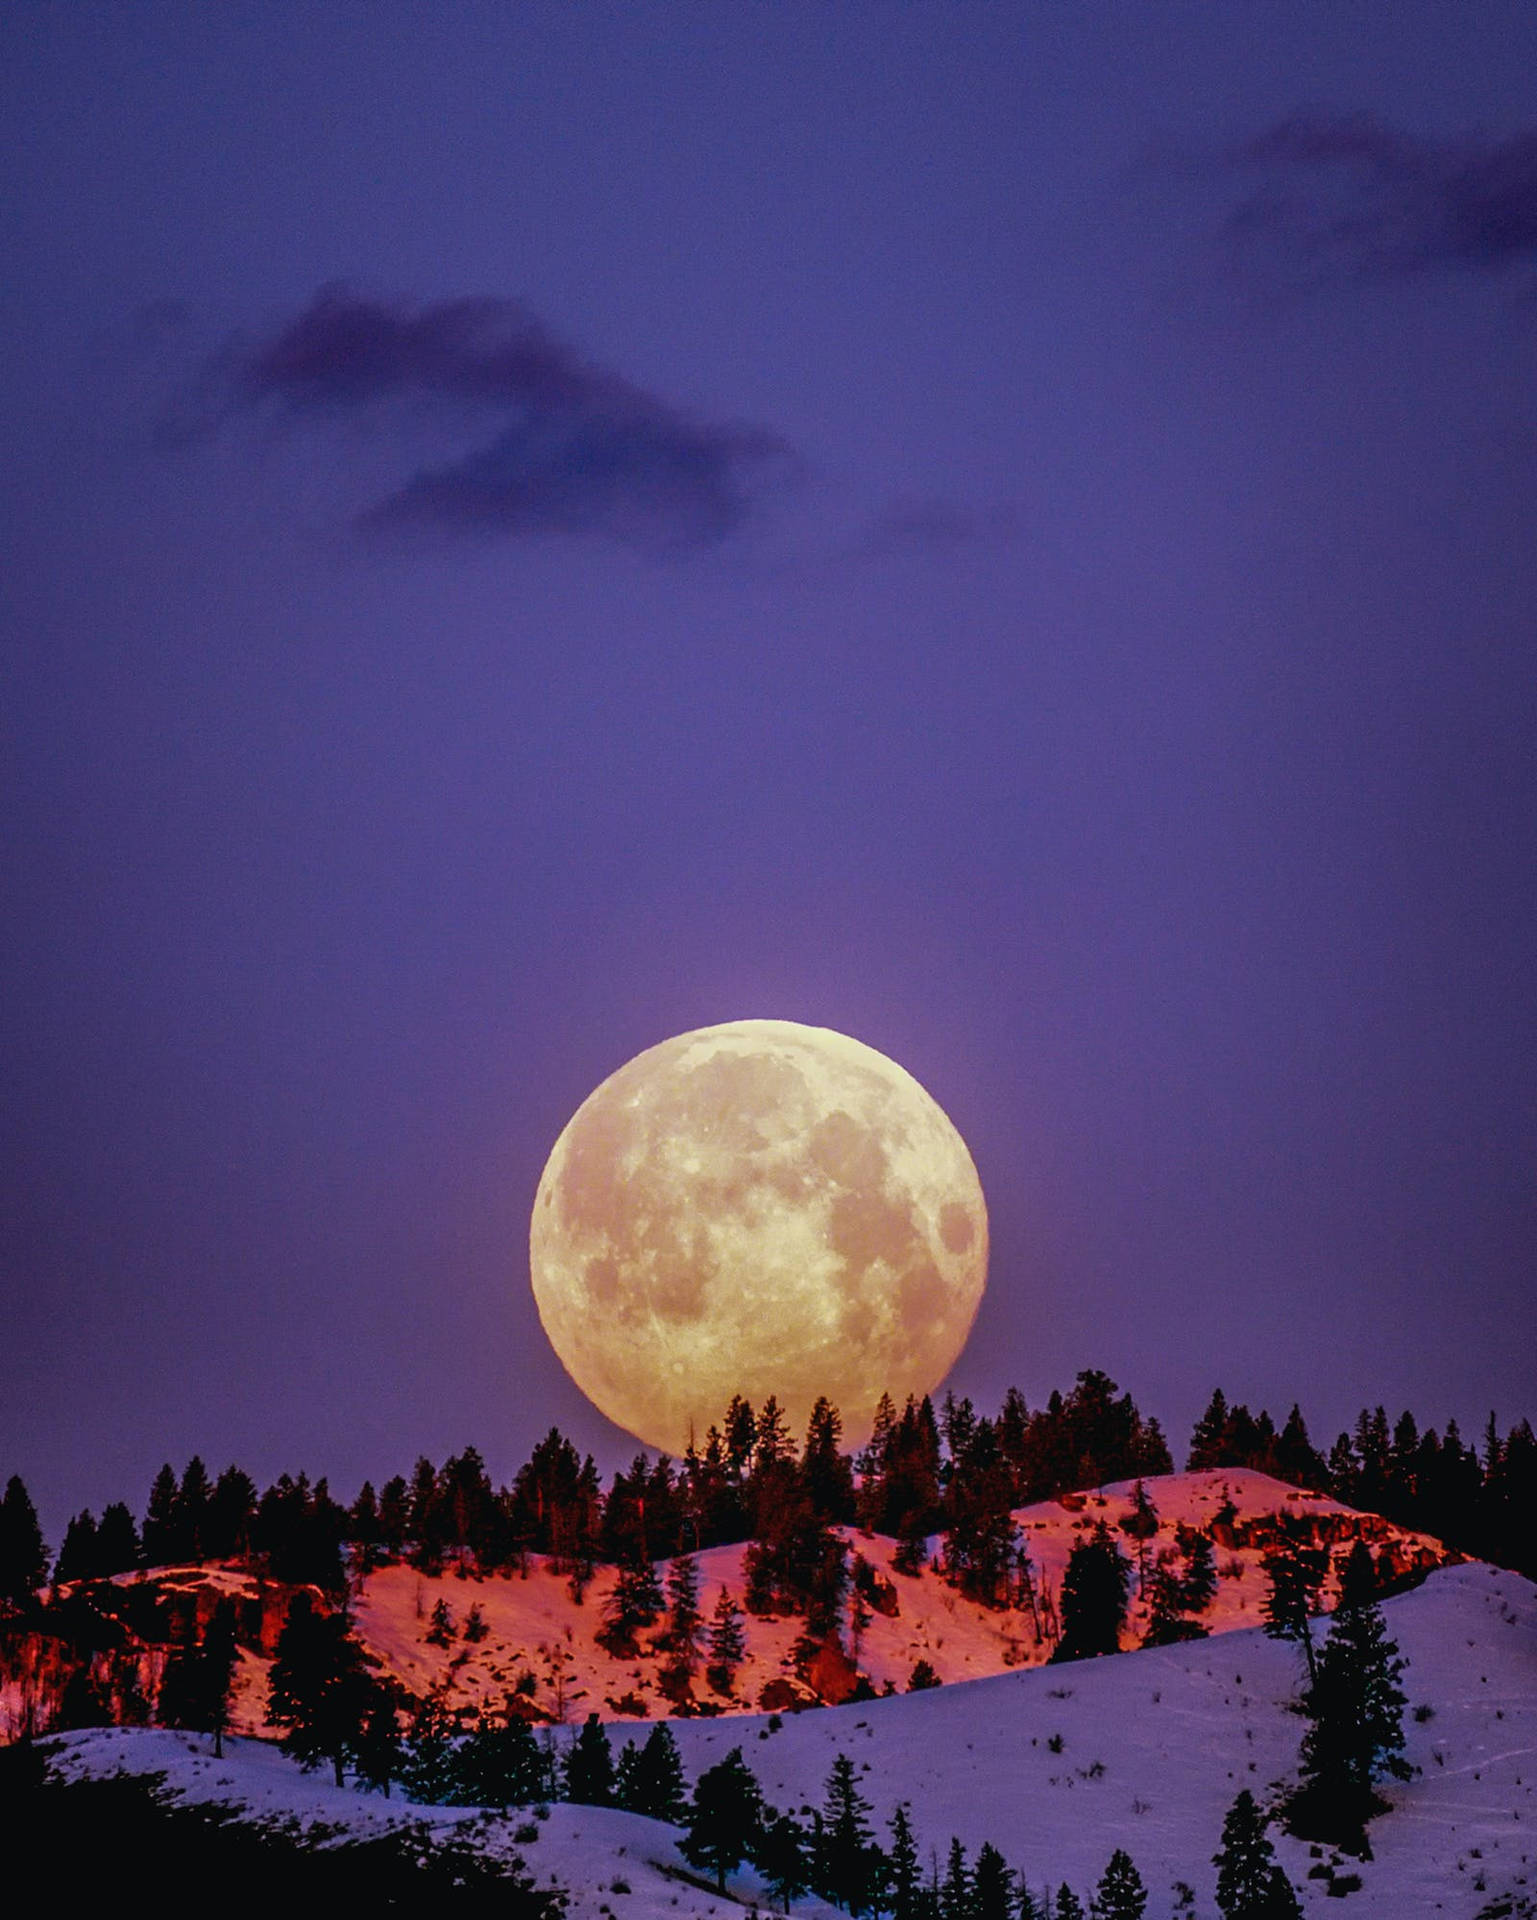 Super Moon Casting Moonlight Over Mountain